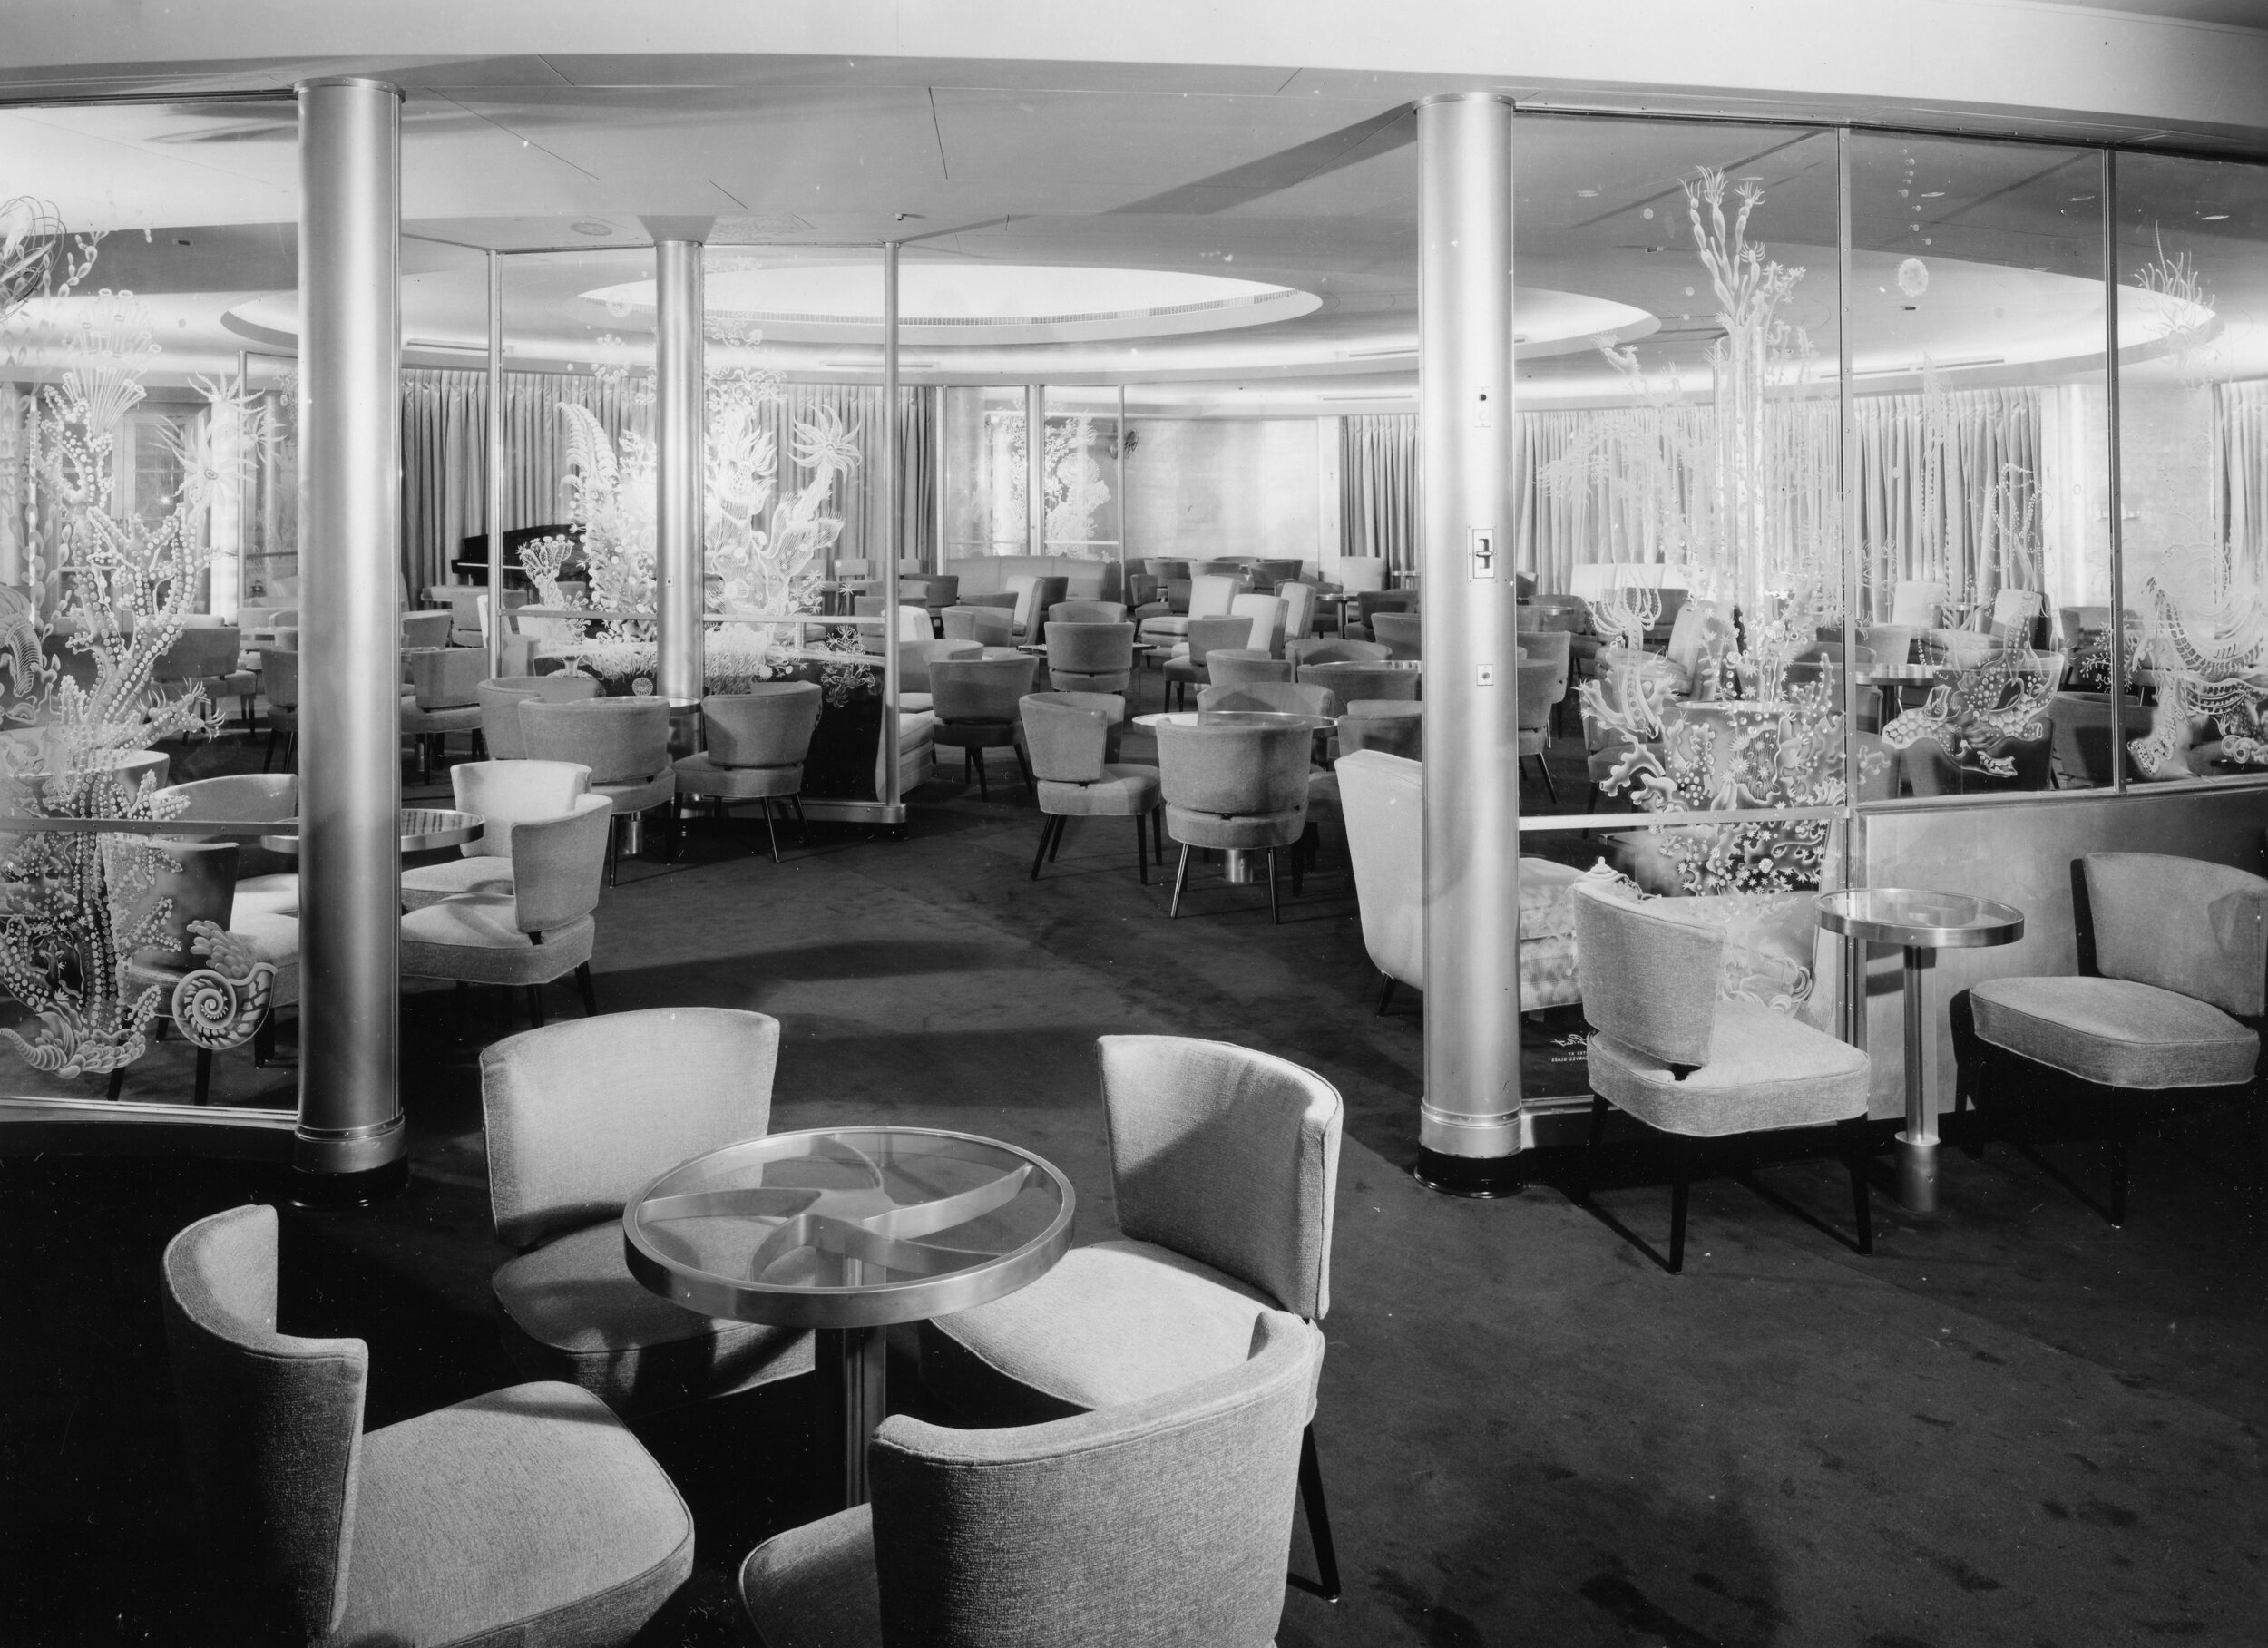 The first class ballroom is an example of the ship’s gorgeous mid-century interiors